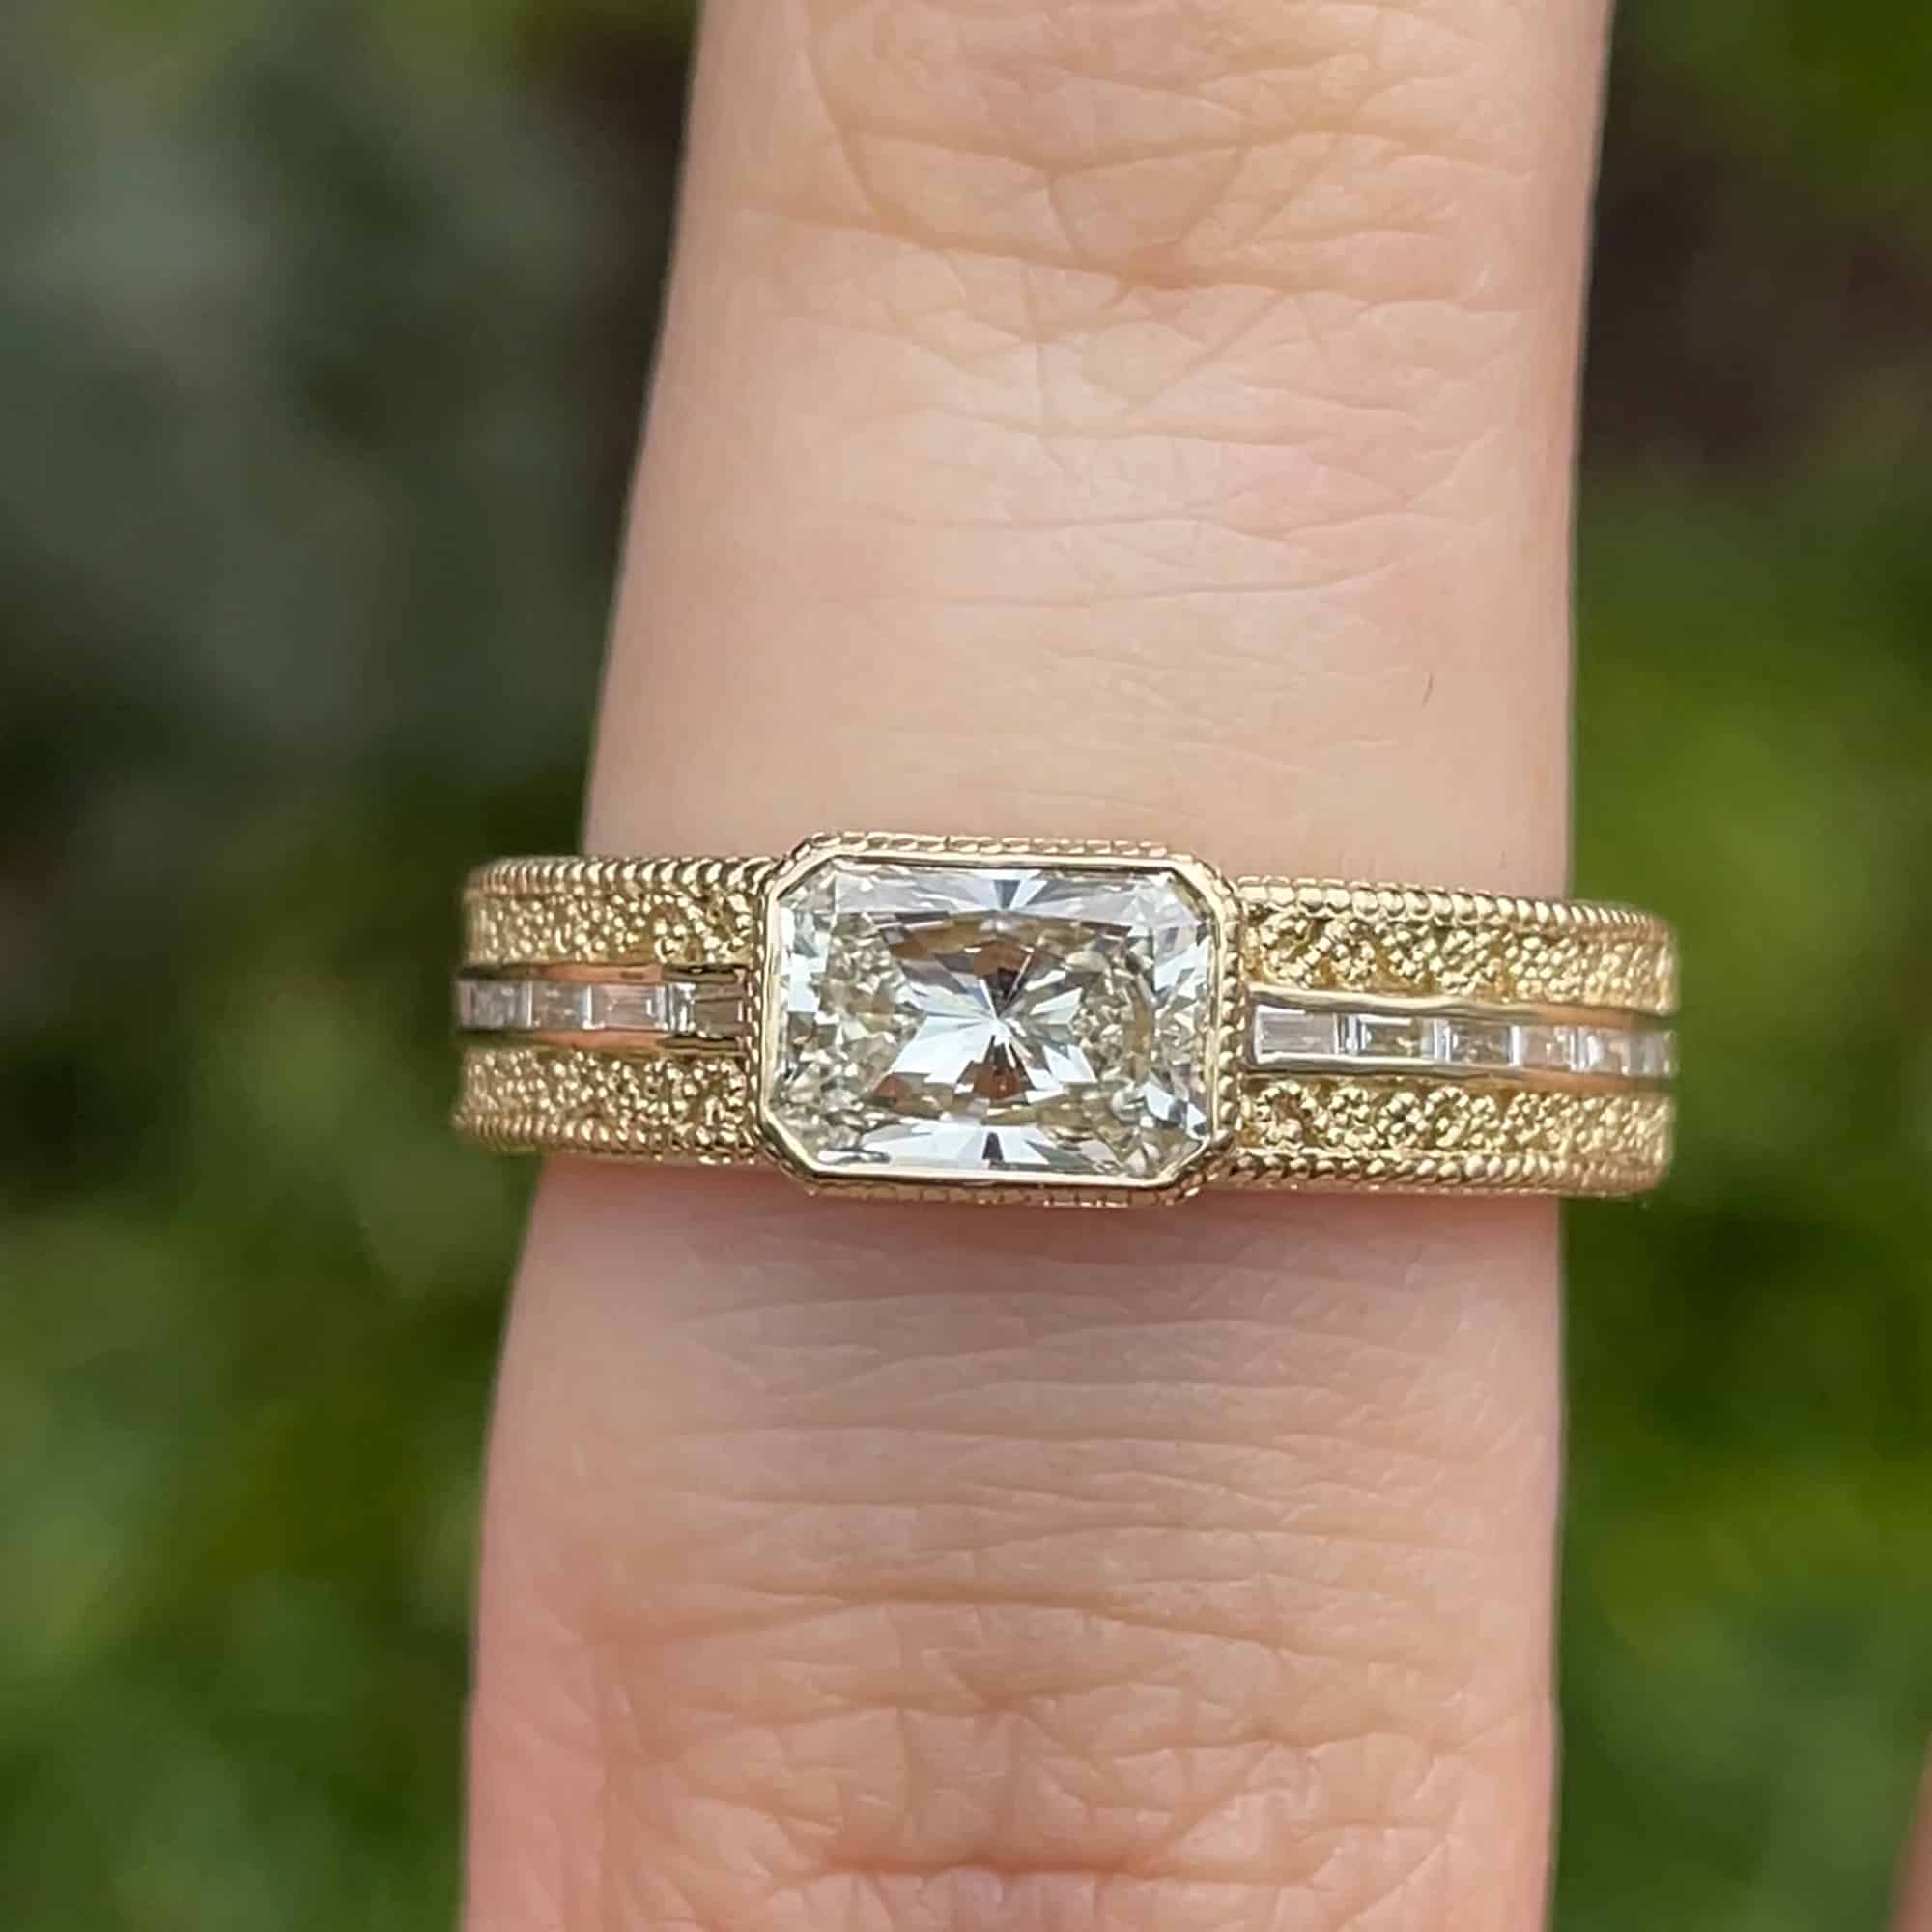 A custom ring in 14k yellow gold with a 1.01-carat diamond